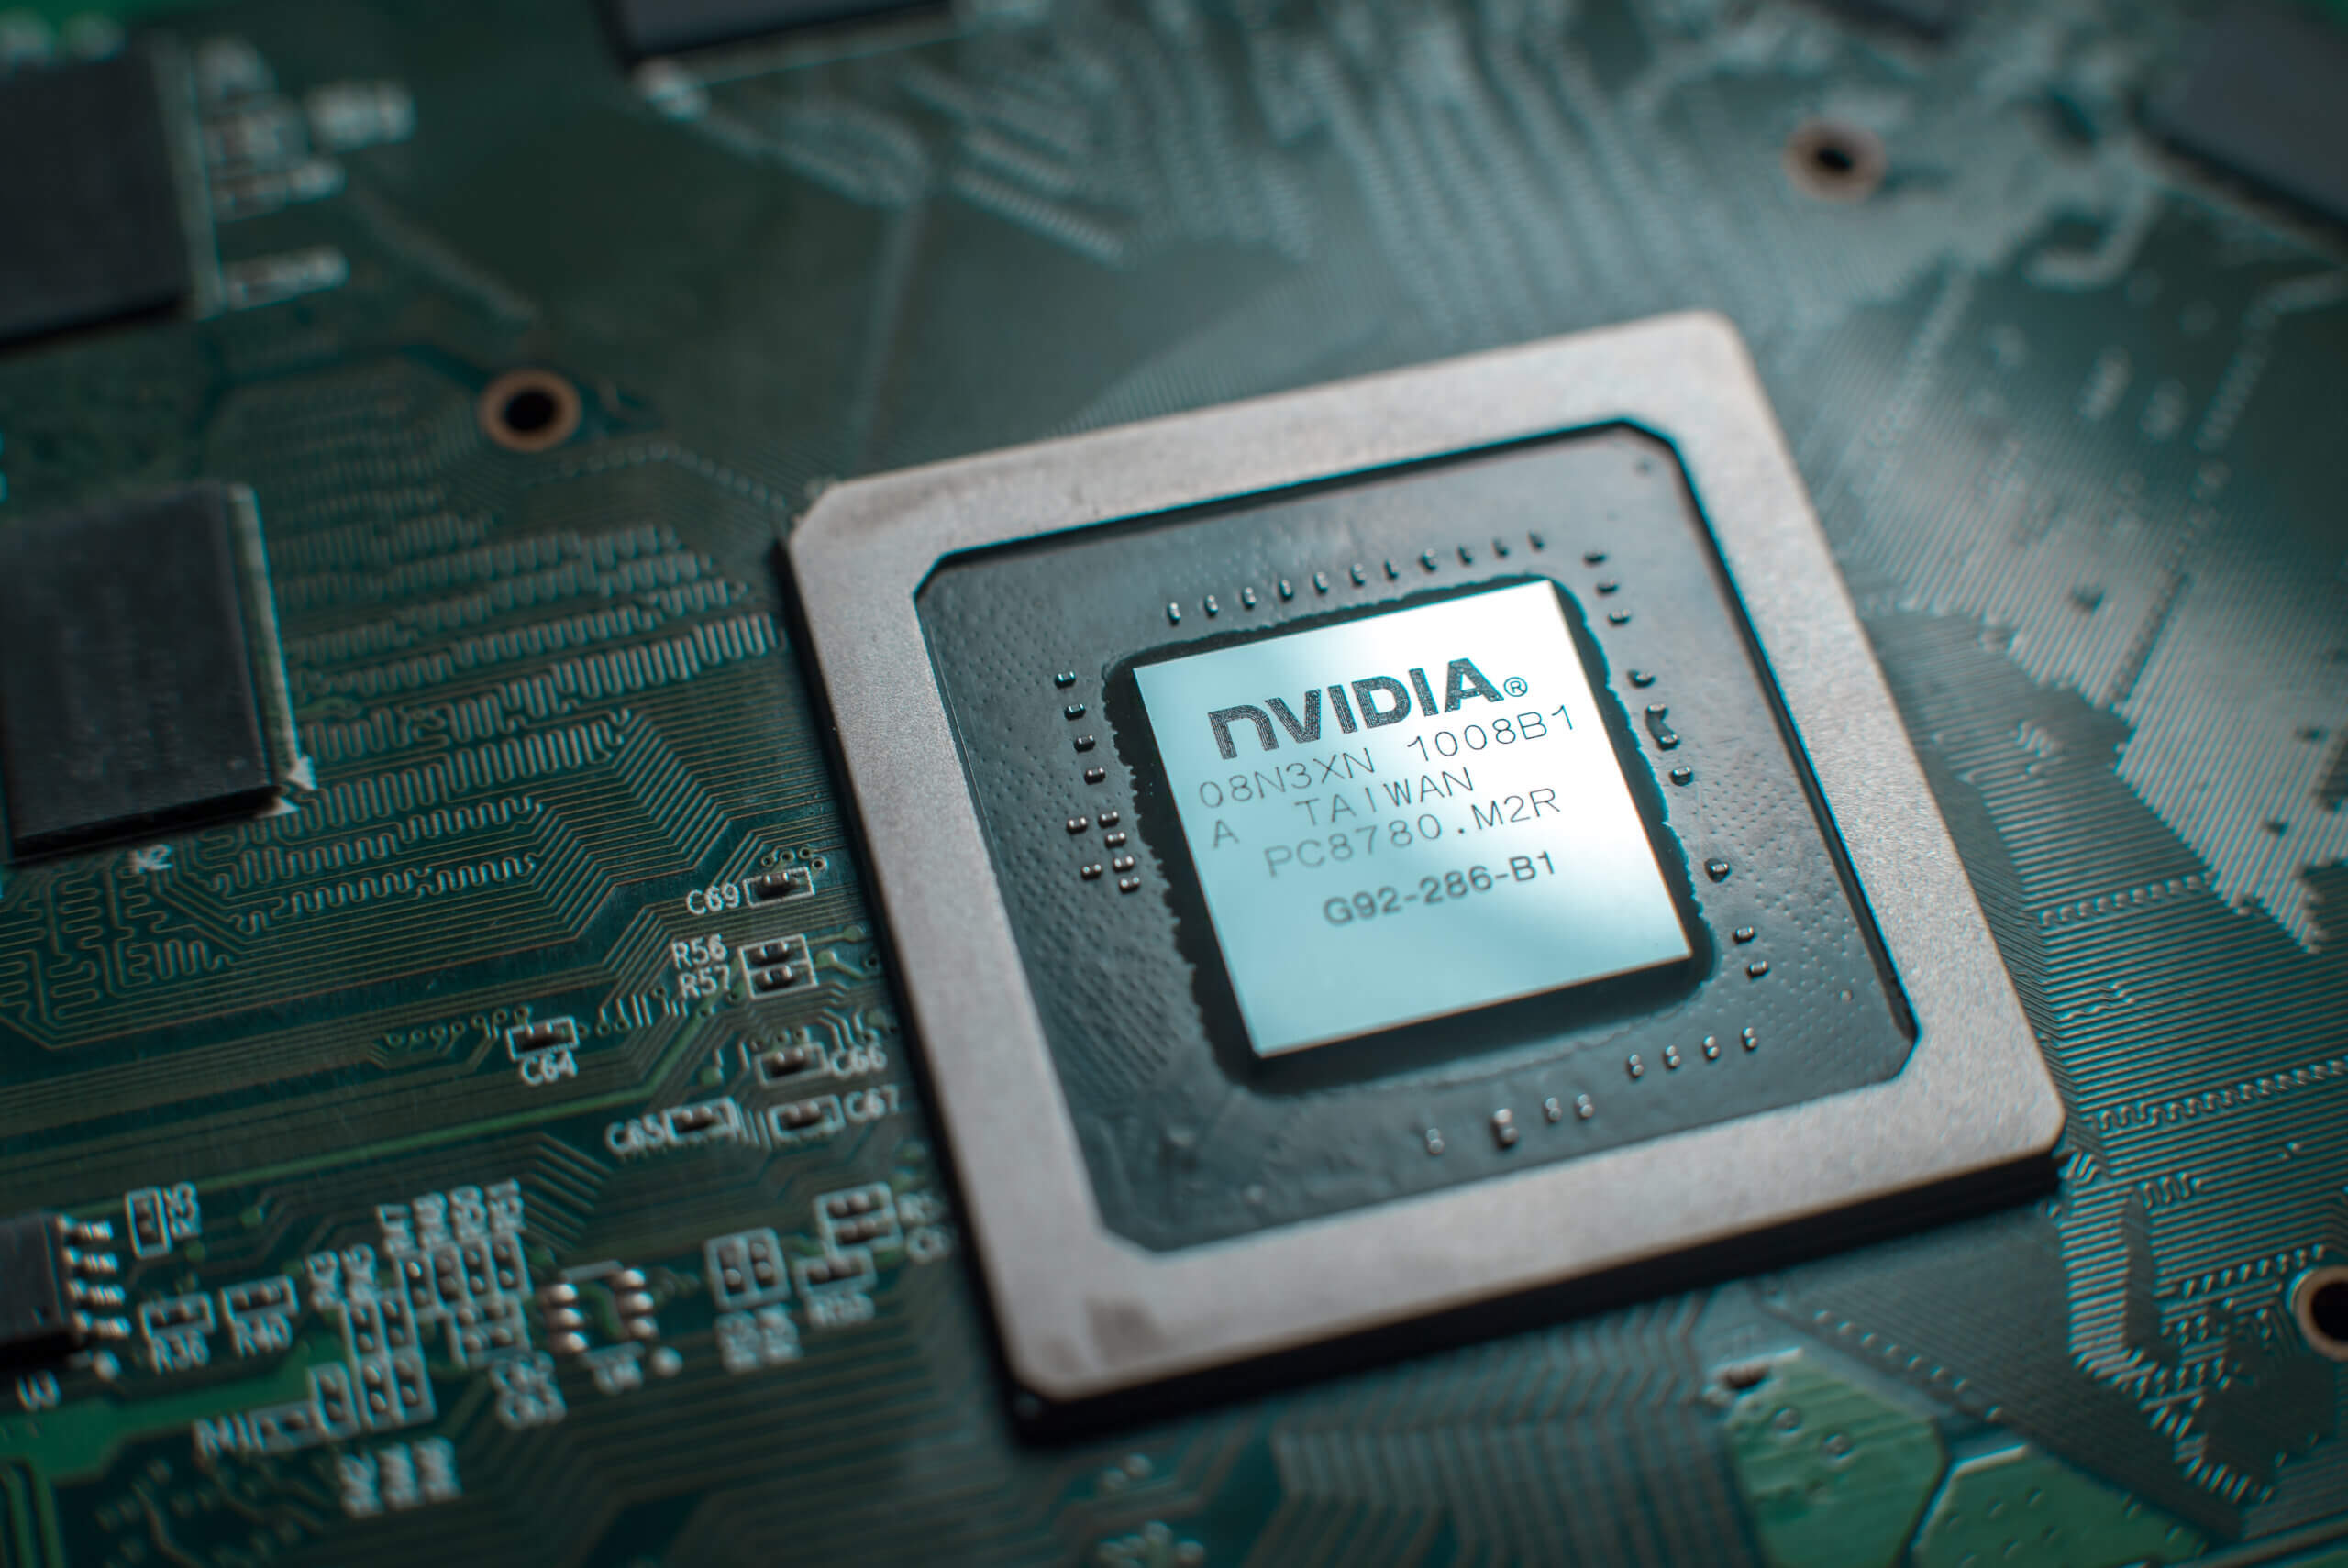 French authorities have been interviewing market players on the critical role Nvidia plays in AI chips. Source: Shutterstock